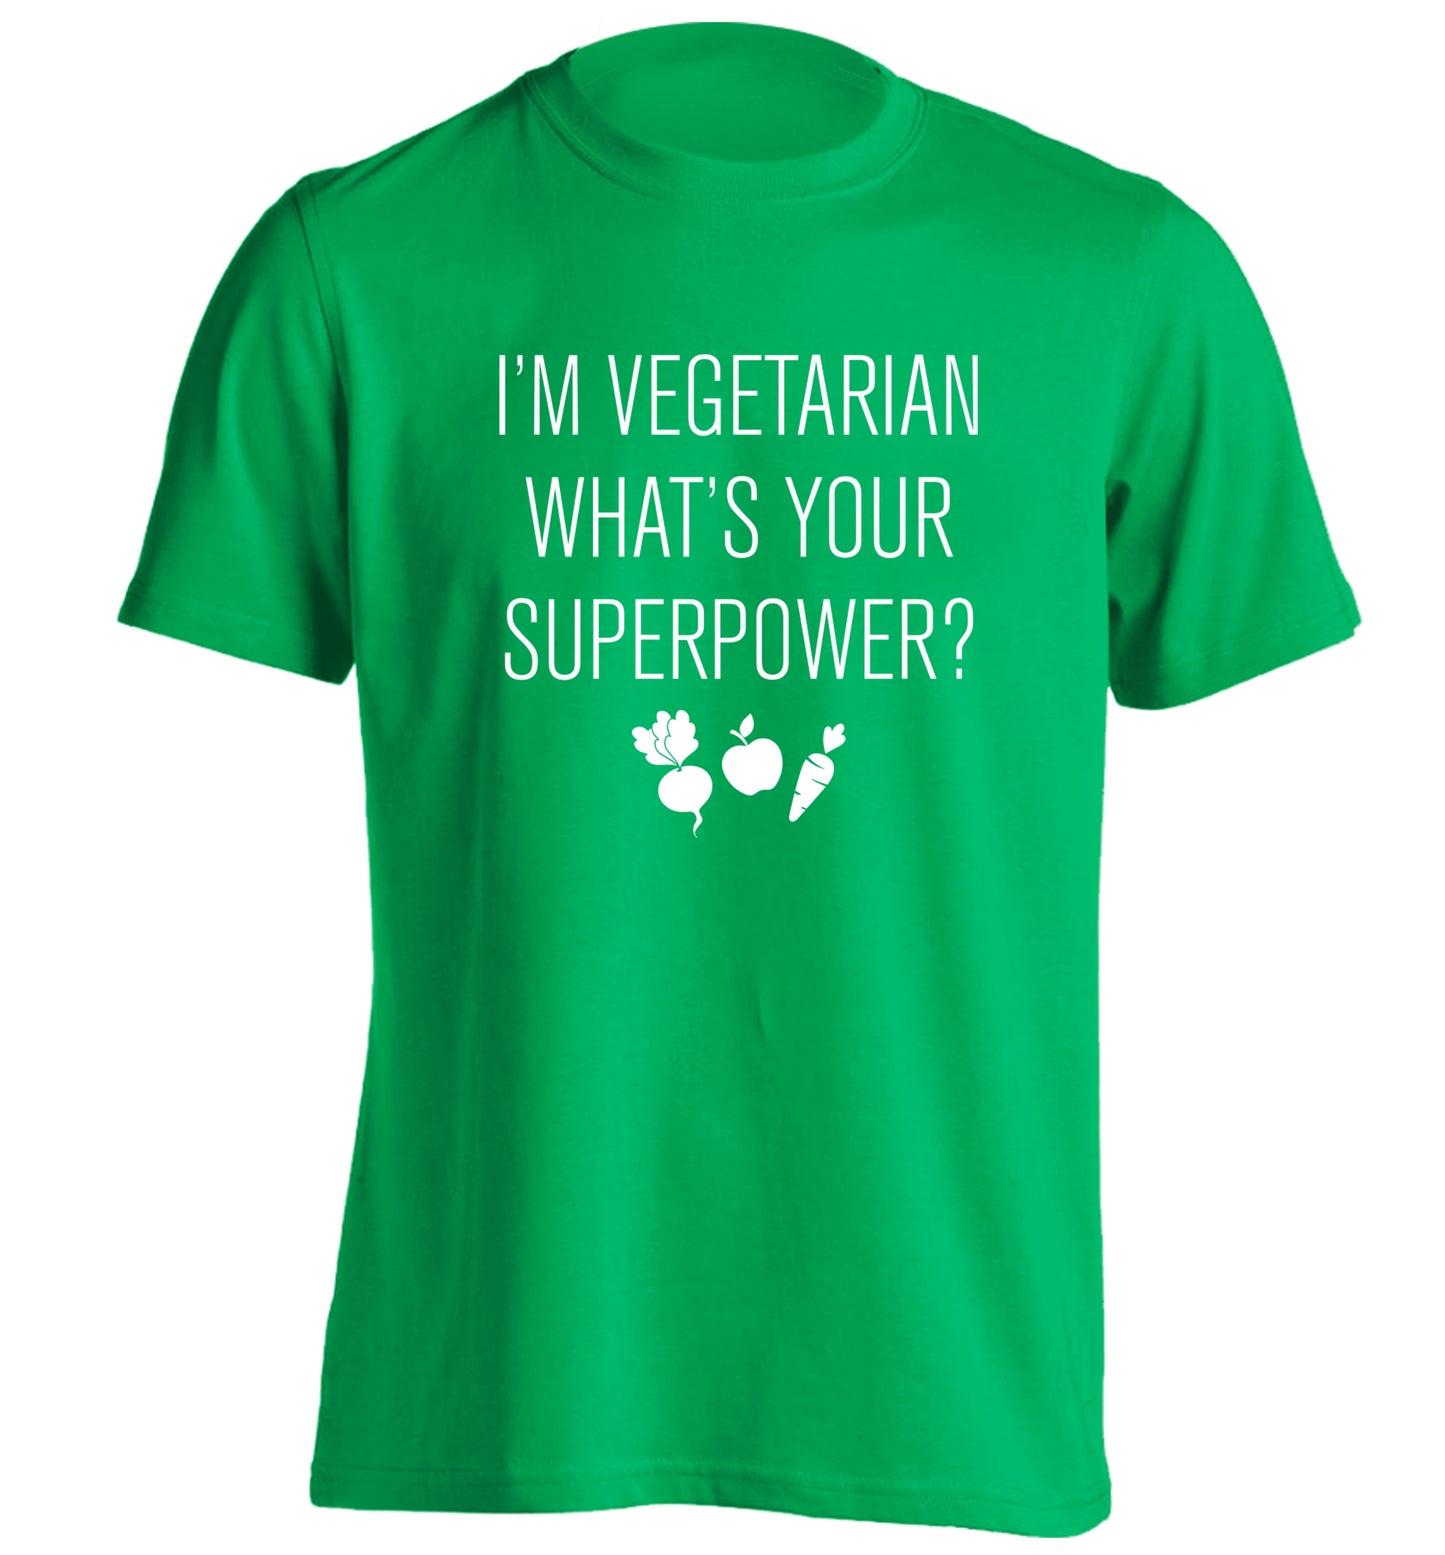 I'm vegetarian what's your superpower? adults unisex green Tshirt 2XL